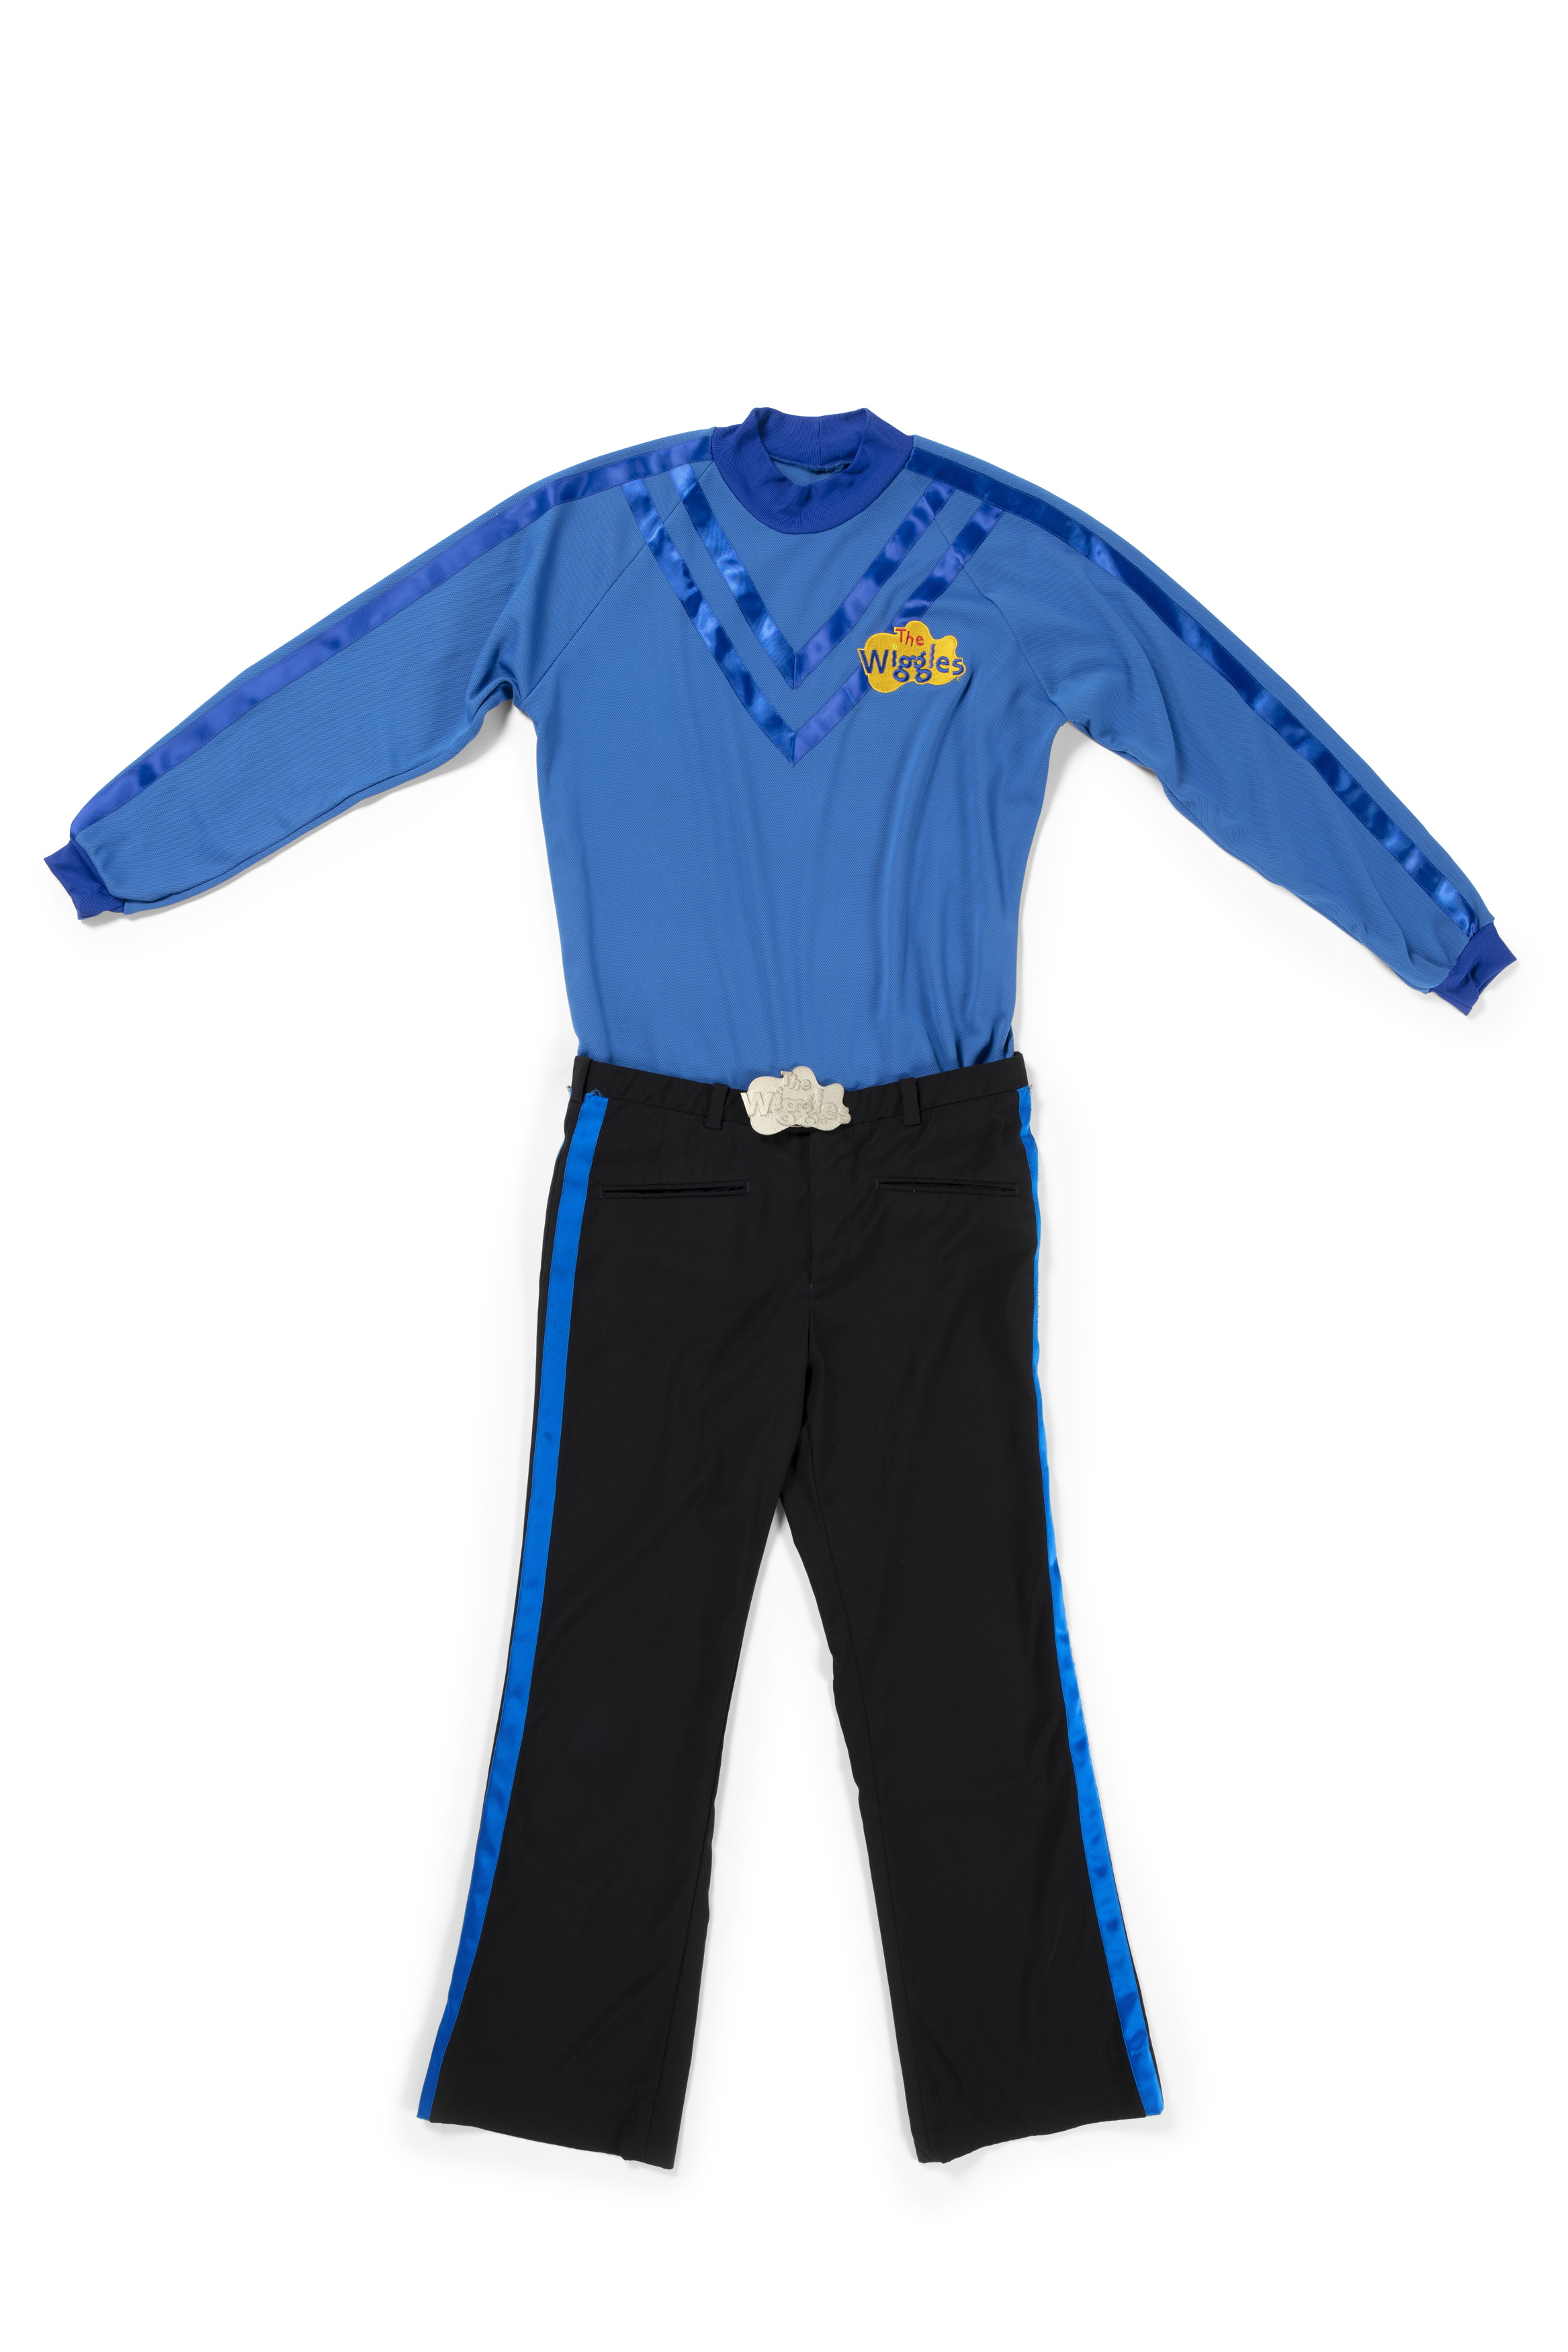 'The Wiggles' costume worn by Anthony Field